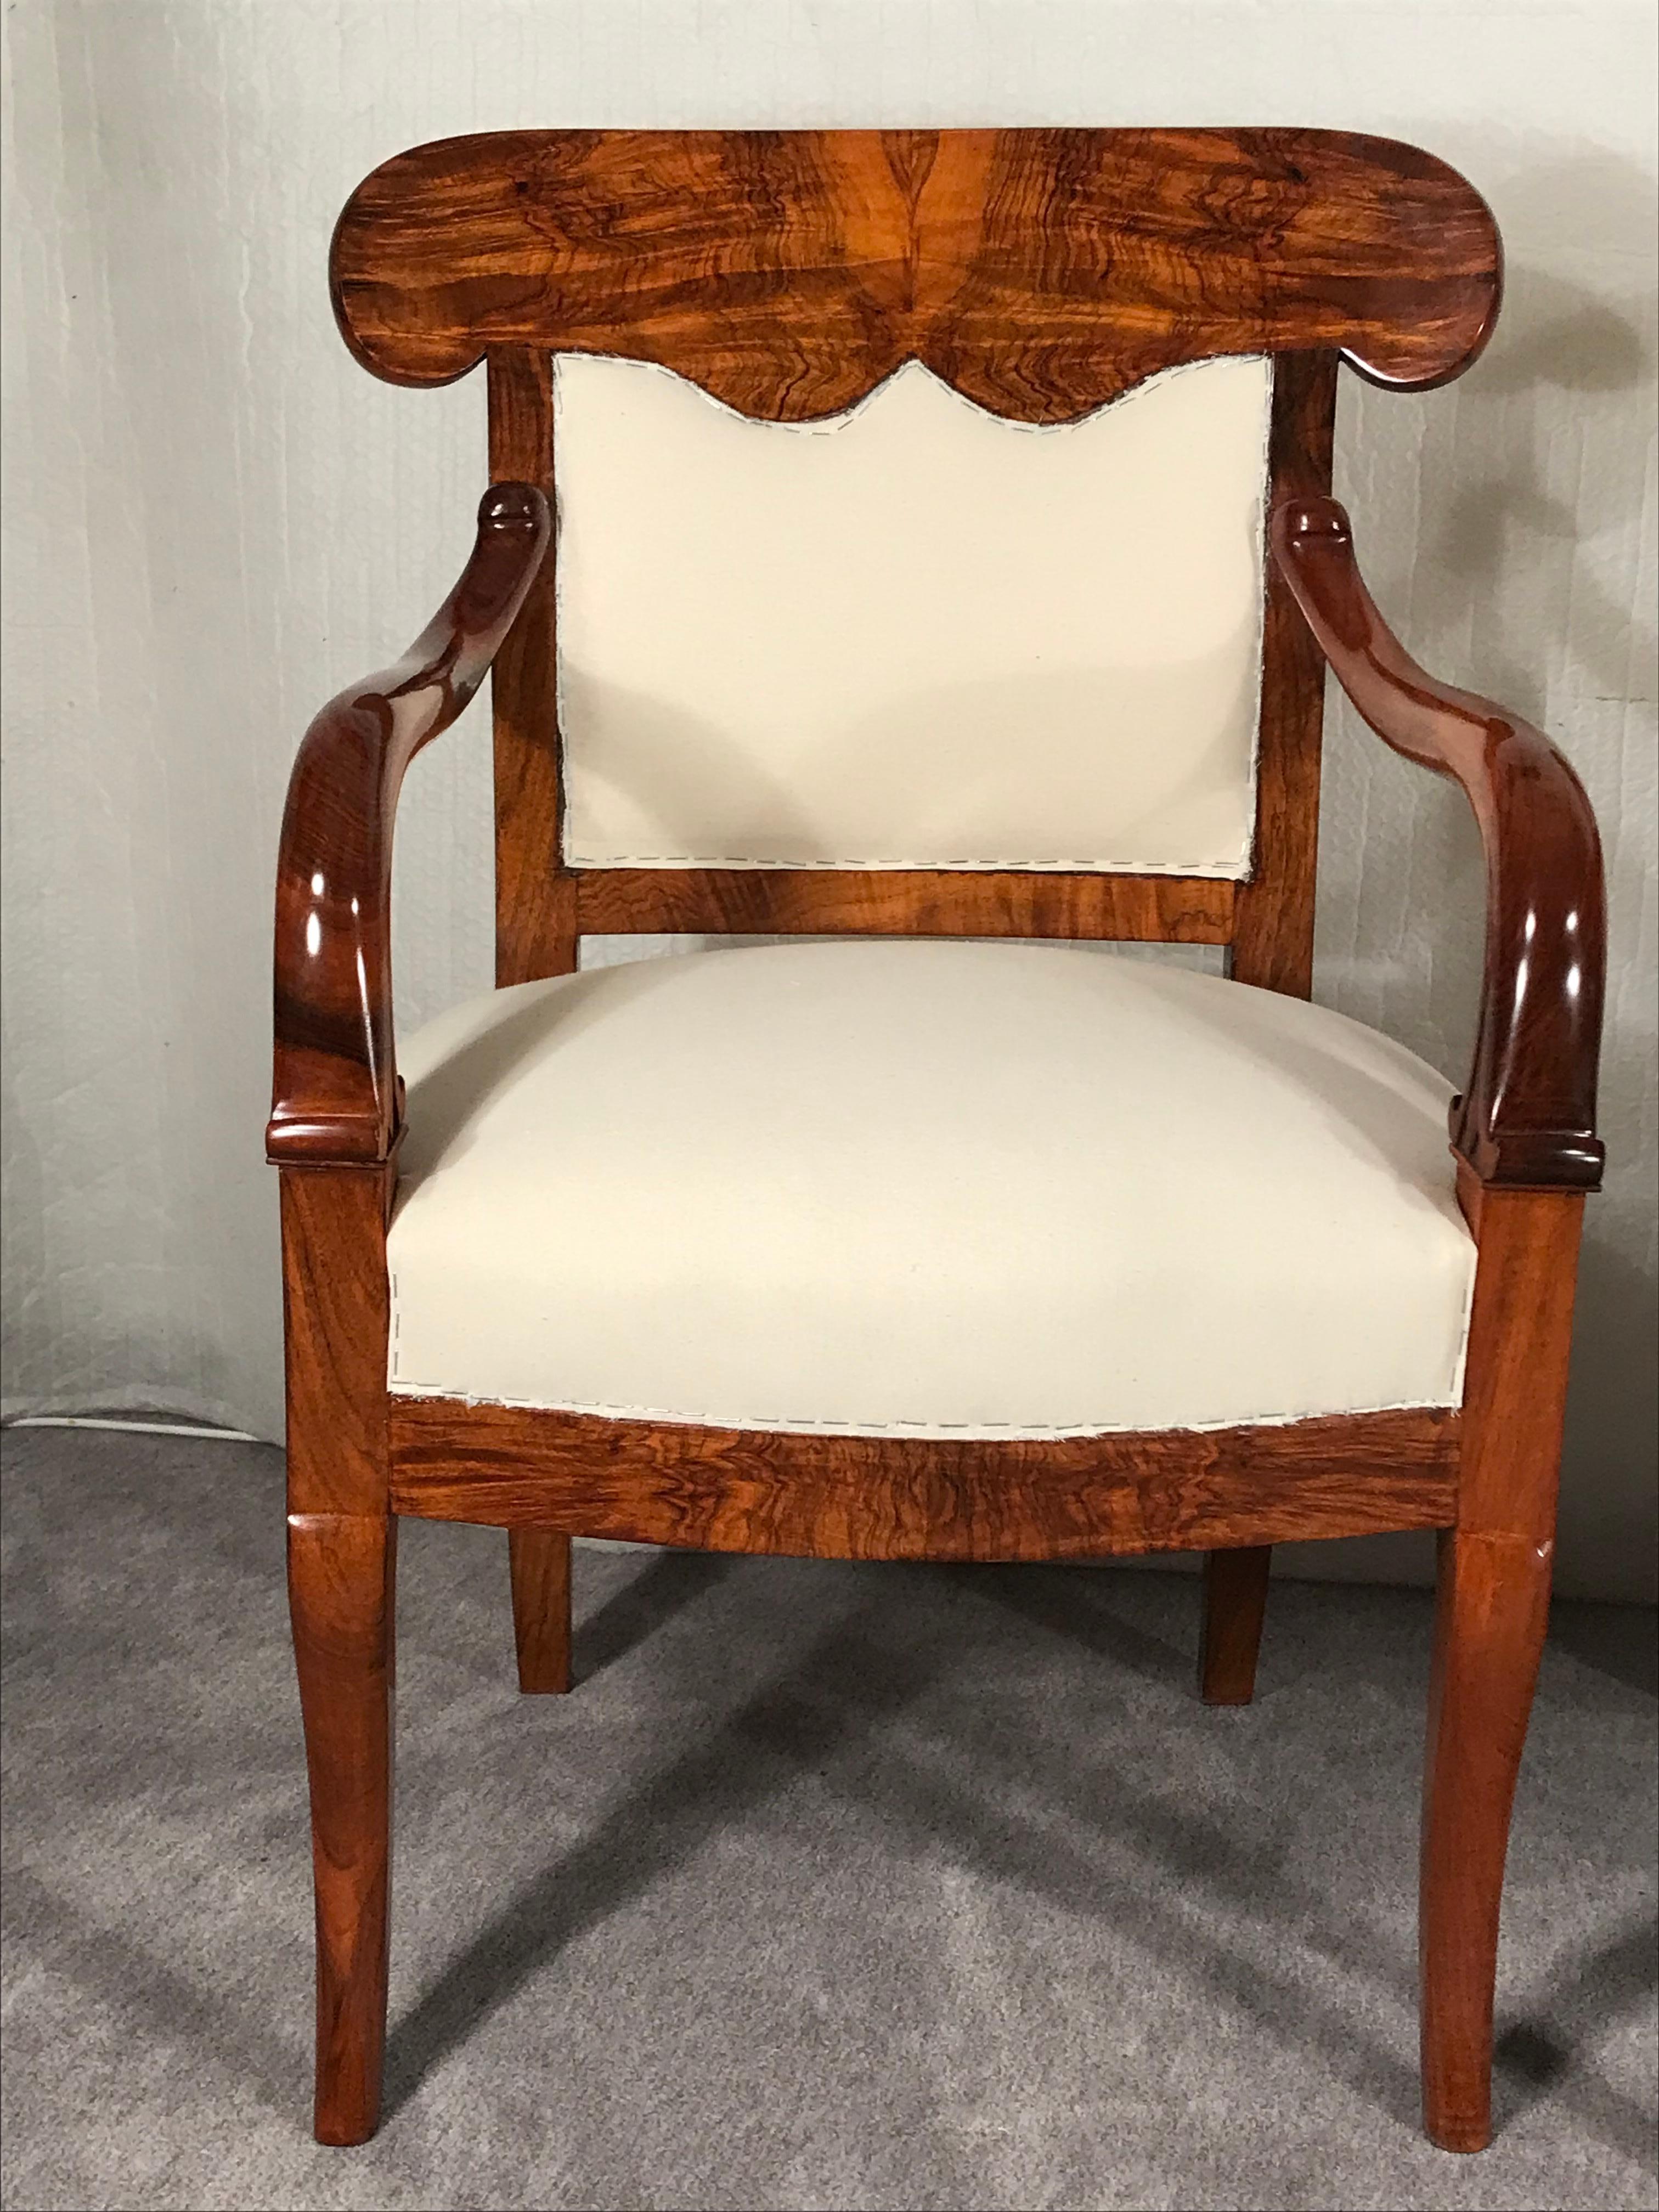 Pair of Biedermeier armchairs, South German 1820. 
This unique pair of Biedermeier armchairs has a gorgeous walnut veneer. They have very pretty hand-carved details on the armrests. 
The chairs come expertly refinished and shellack hand-polished.